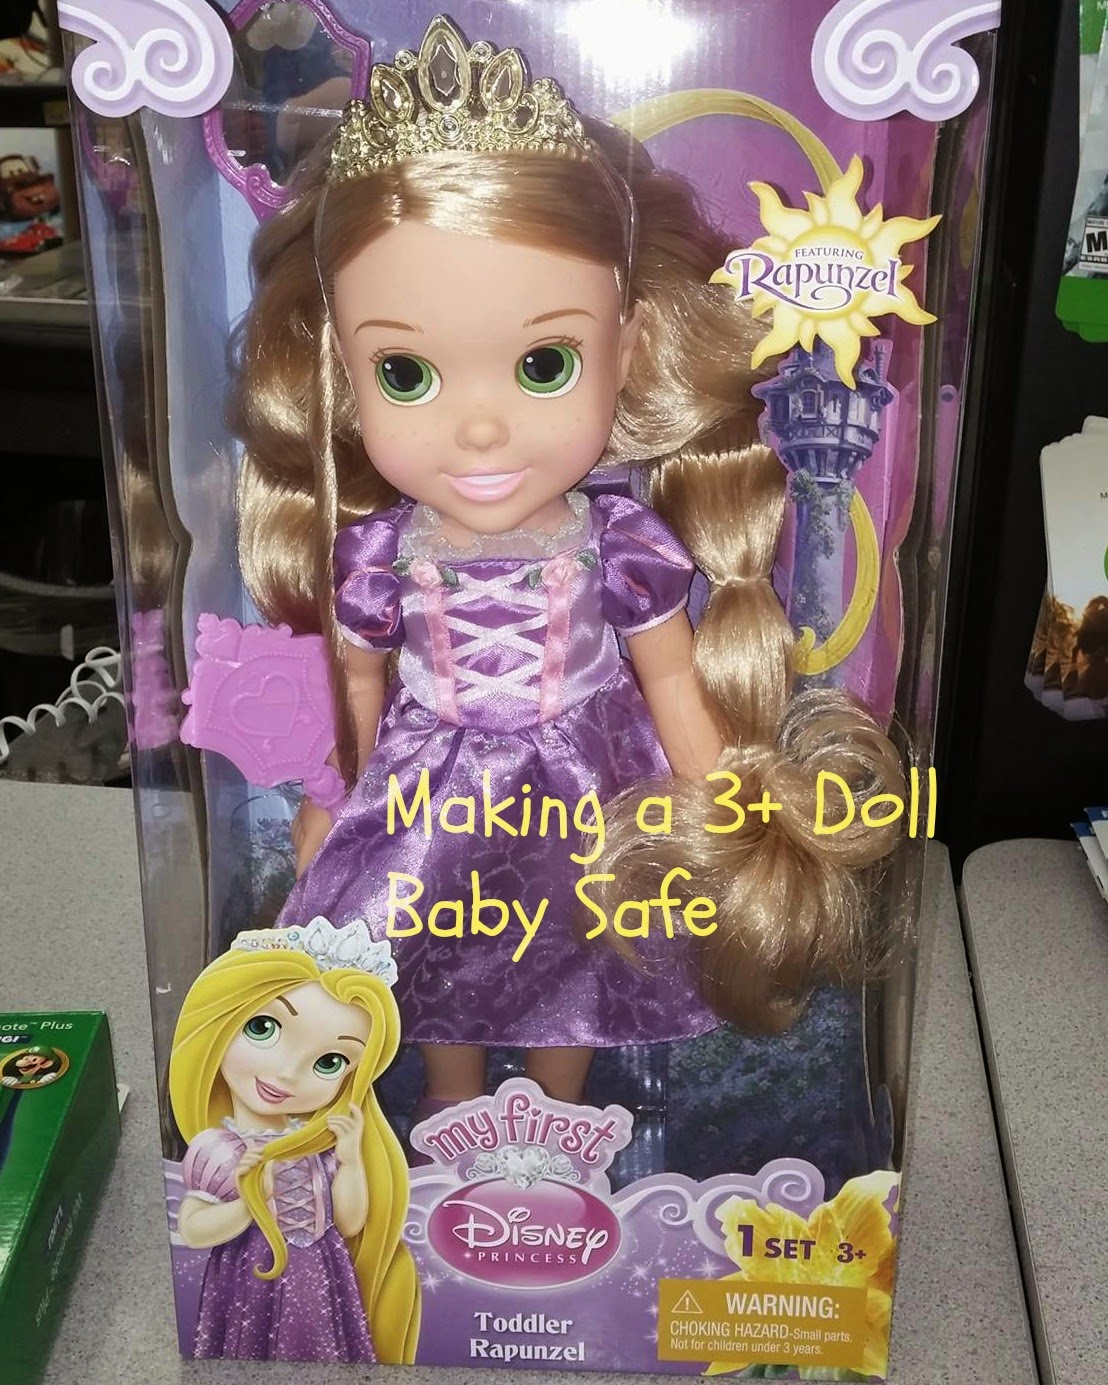 Sceleratus Classical Academy: Making a 3+ Doll Baby Safe Isn't What I ...